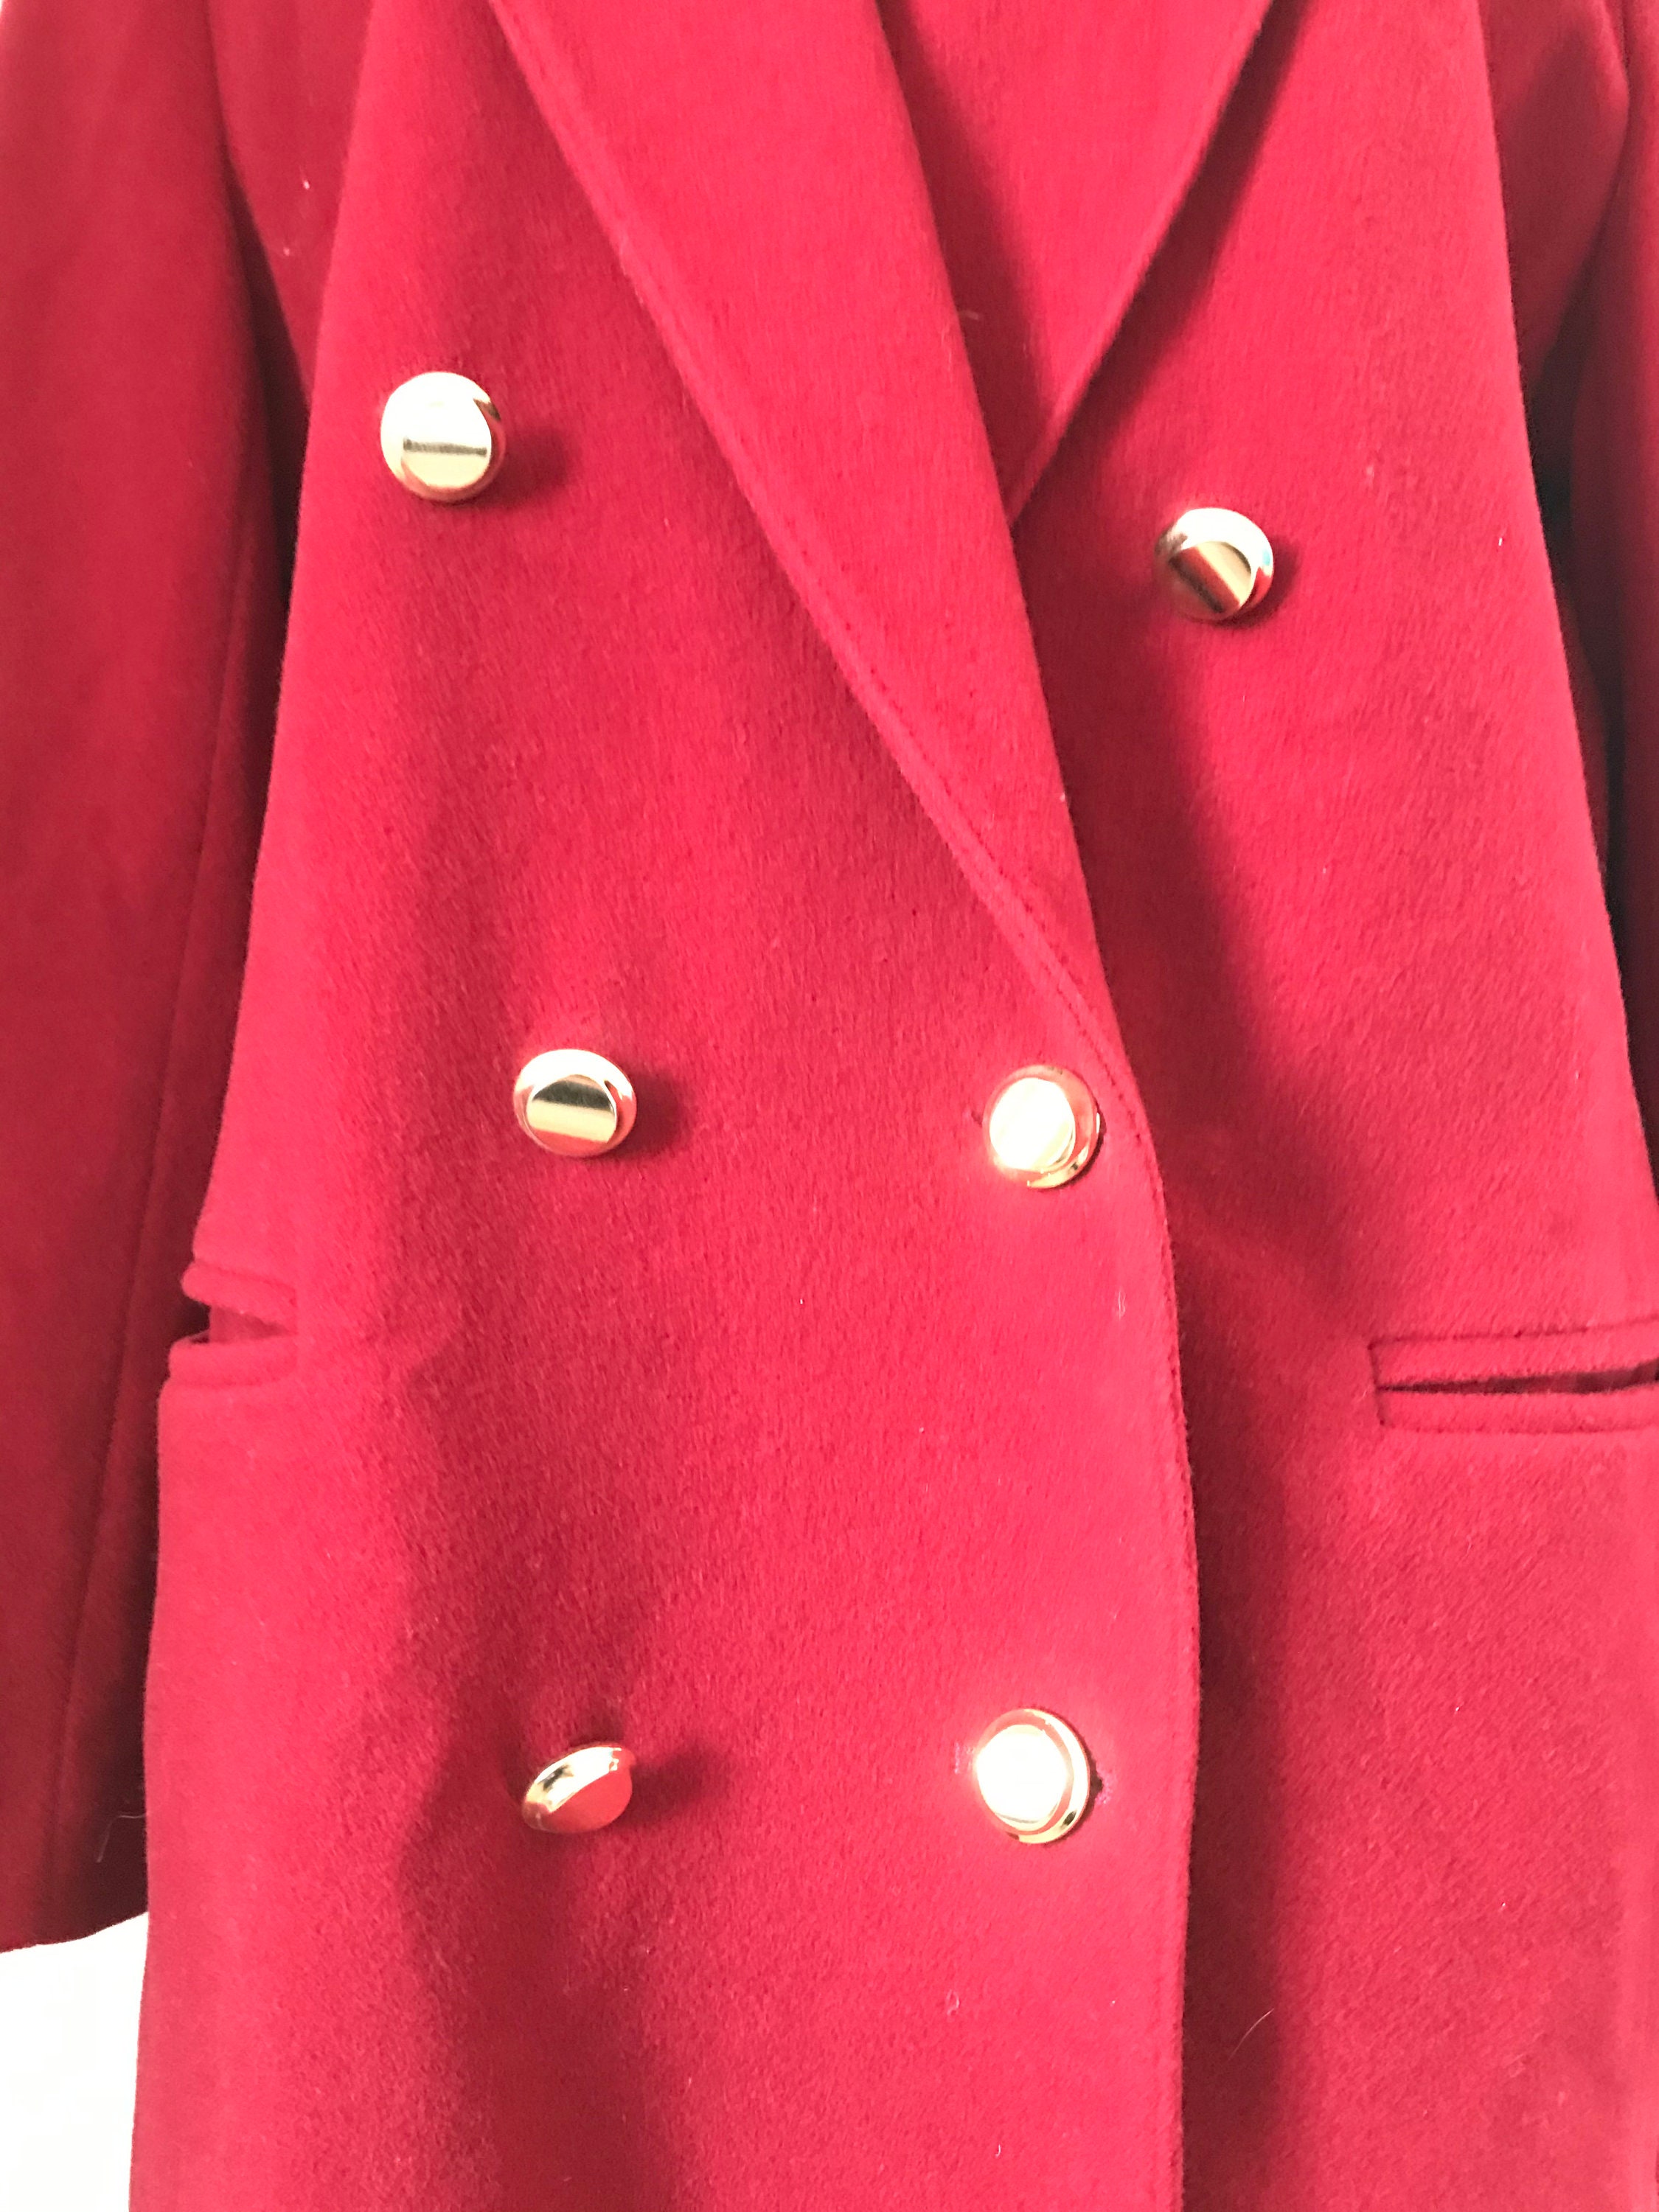 Absolutely beautiful red double breasted jacket with gold | Etsy